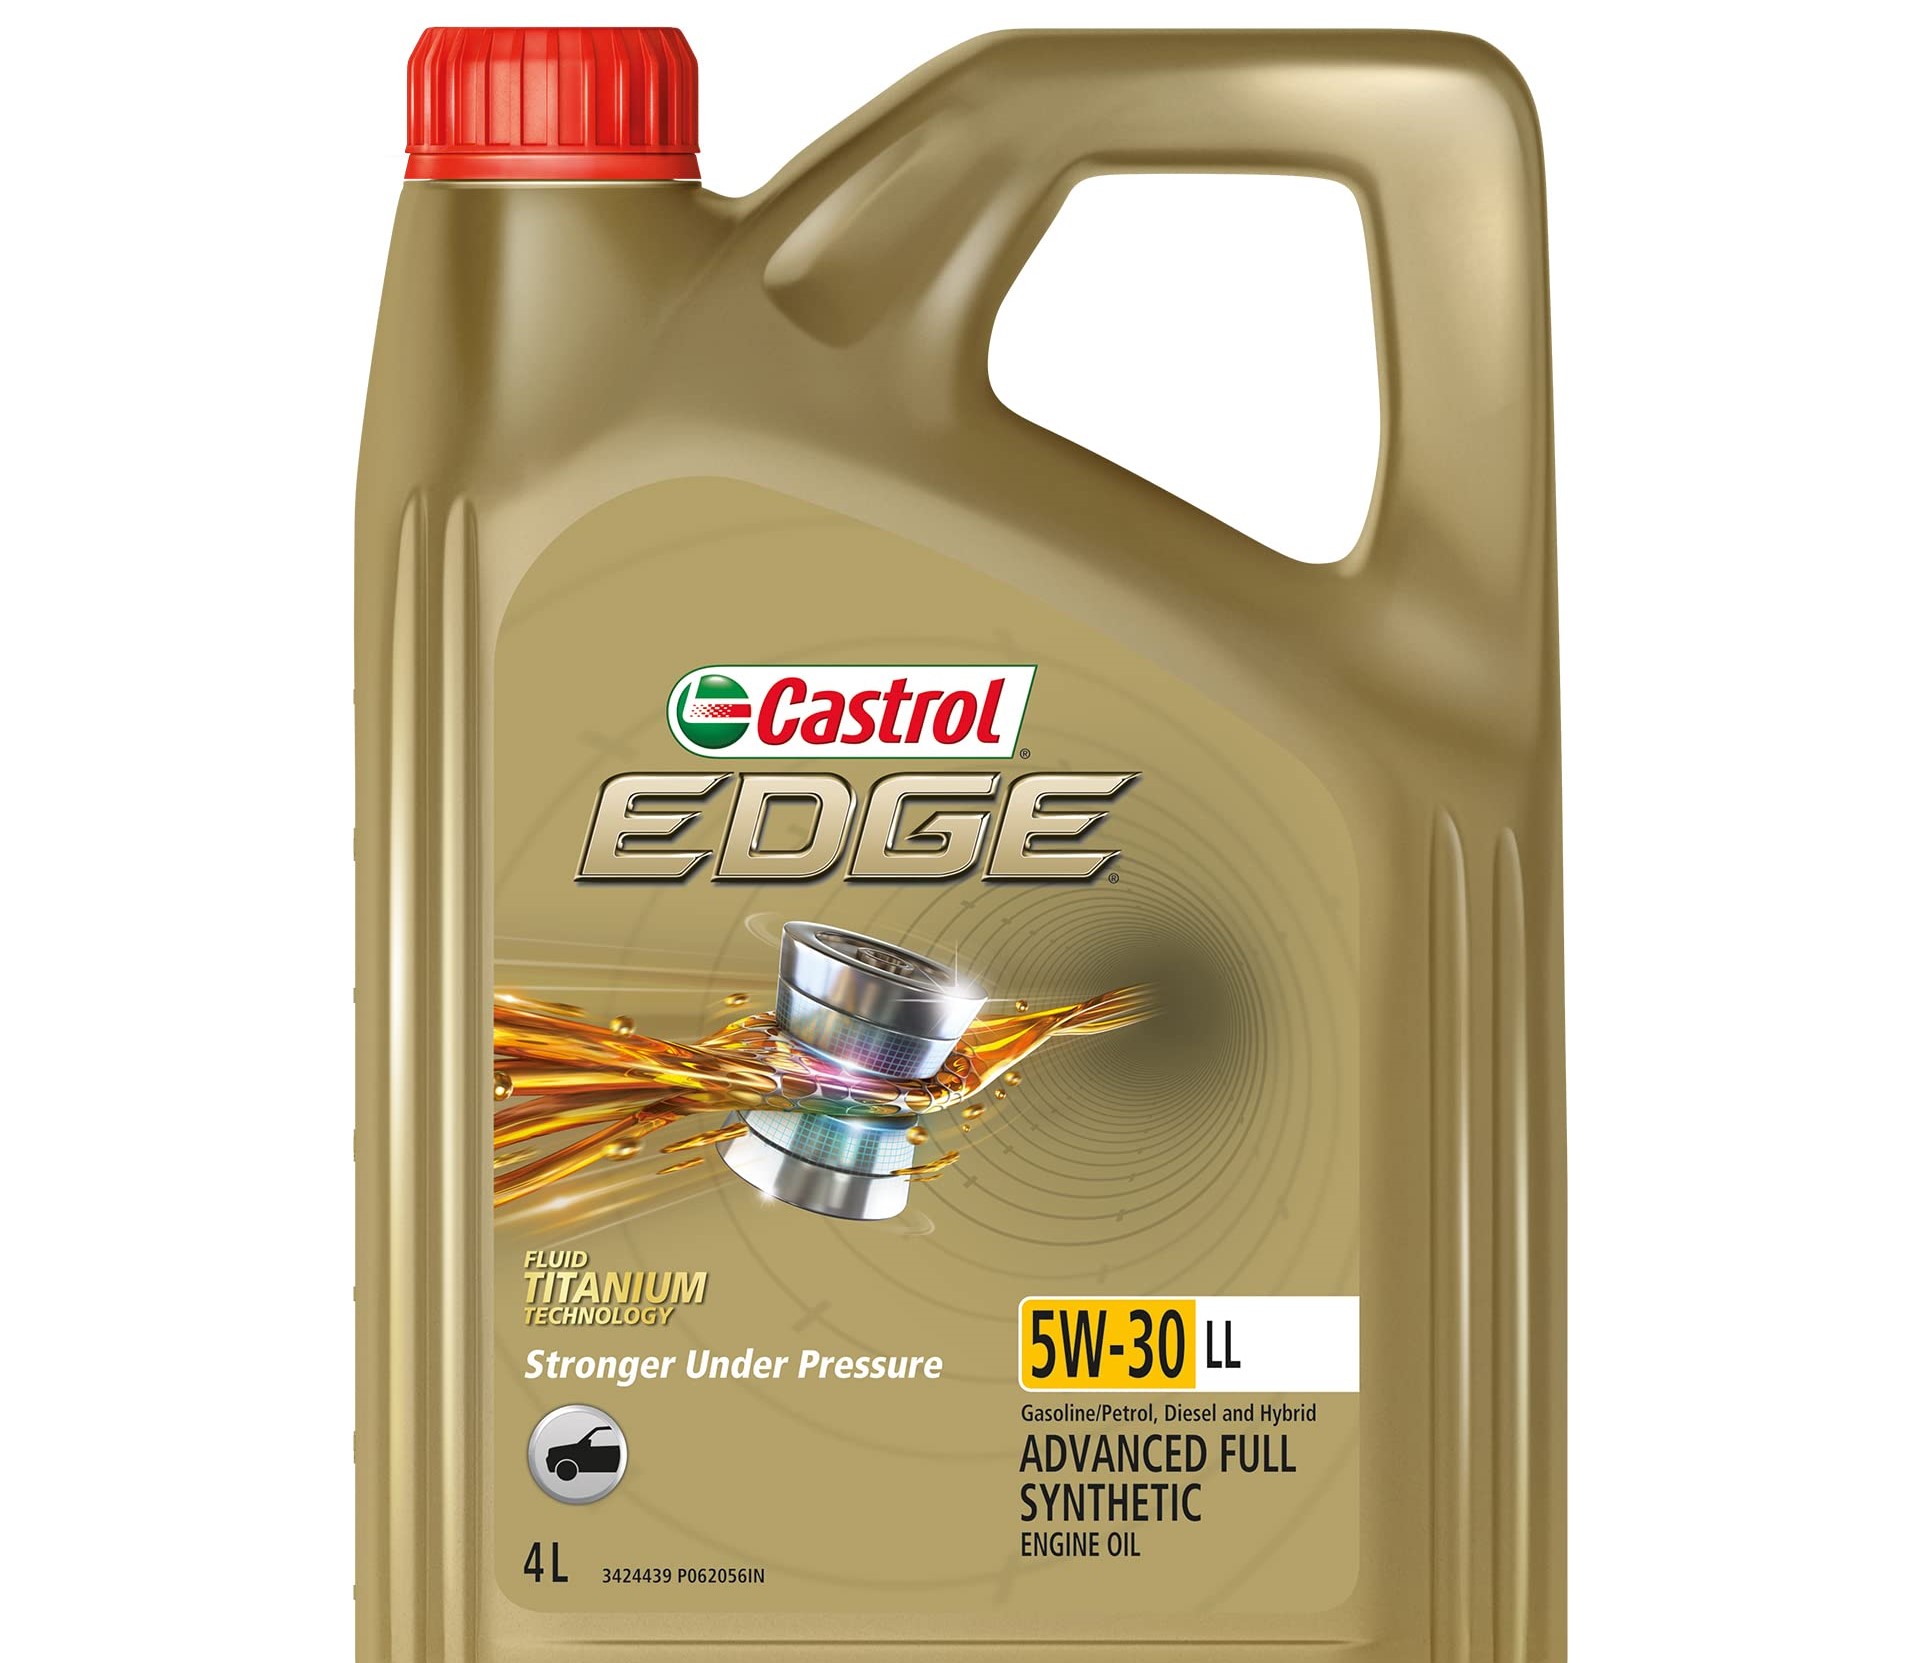 Discover The Superiority Of Castrol Edge: The Ultimate Engine Oil For Your Car!